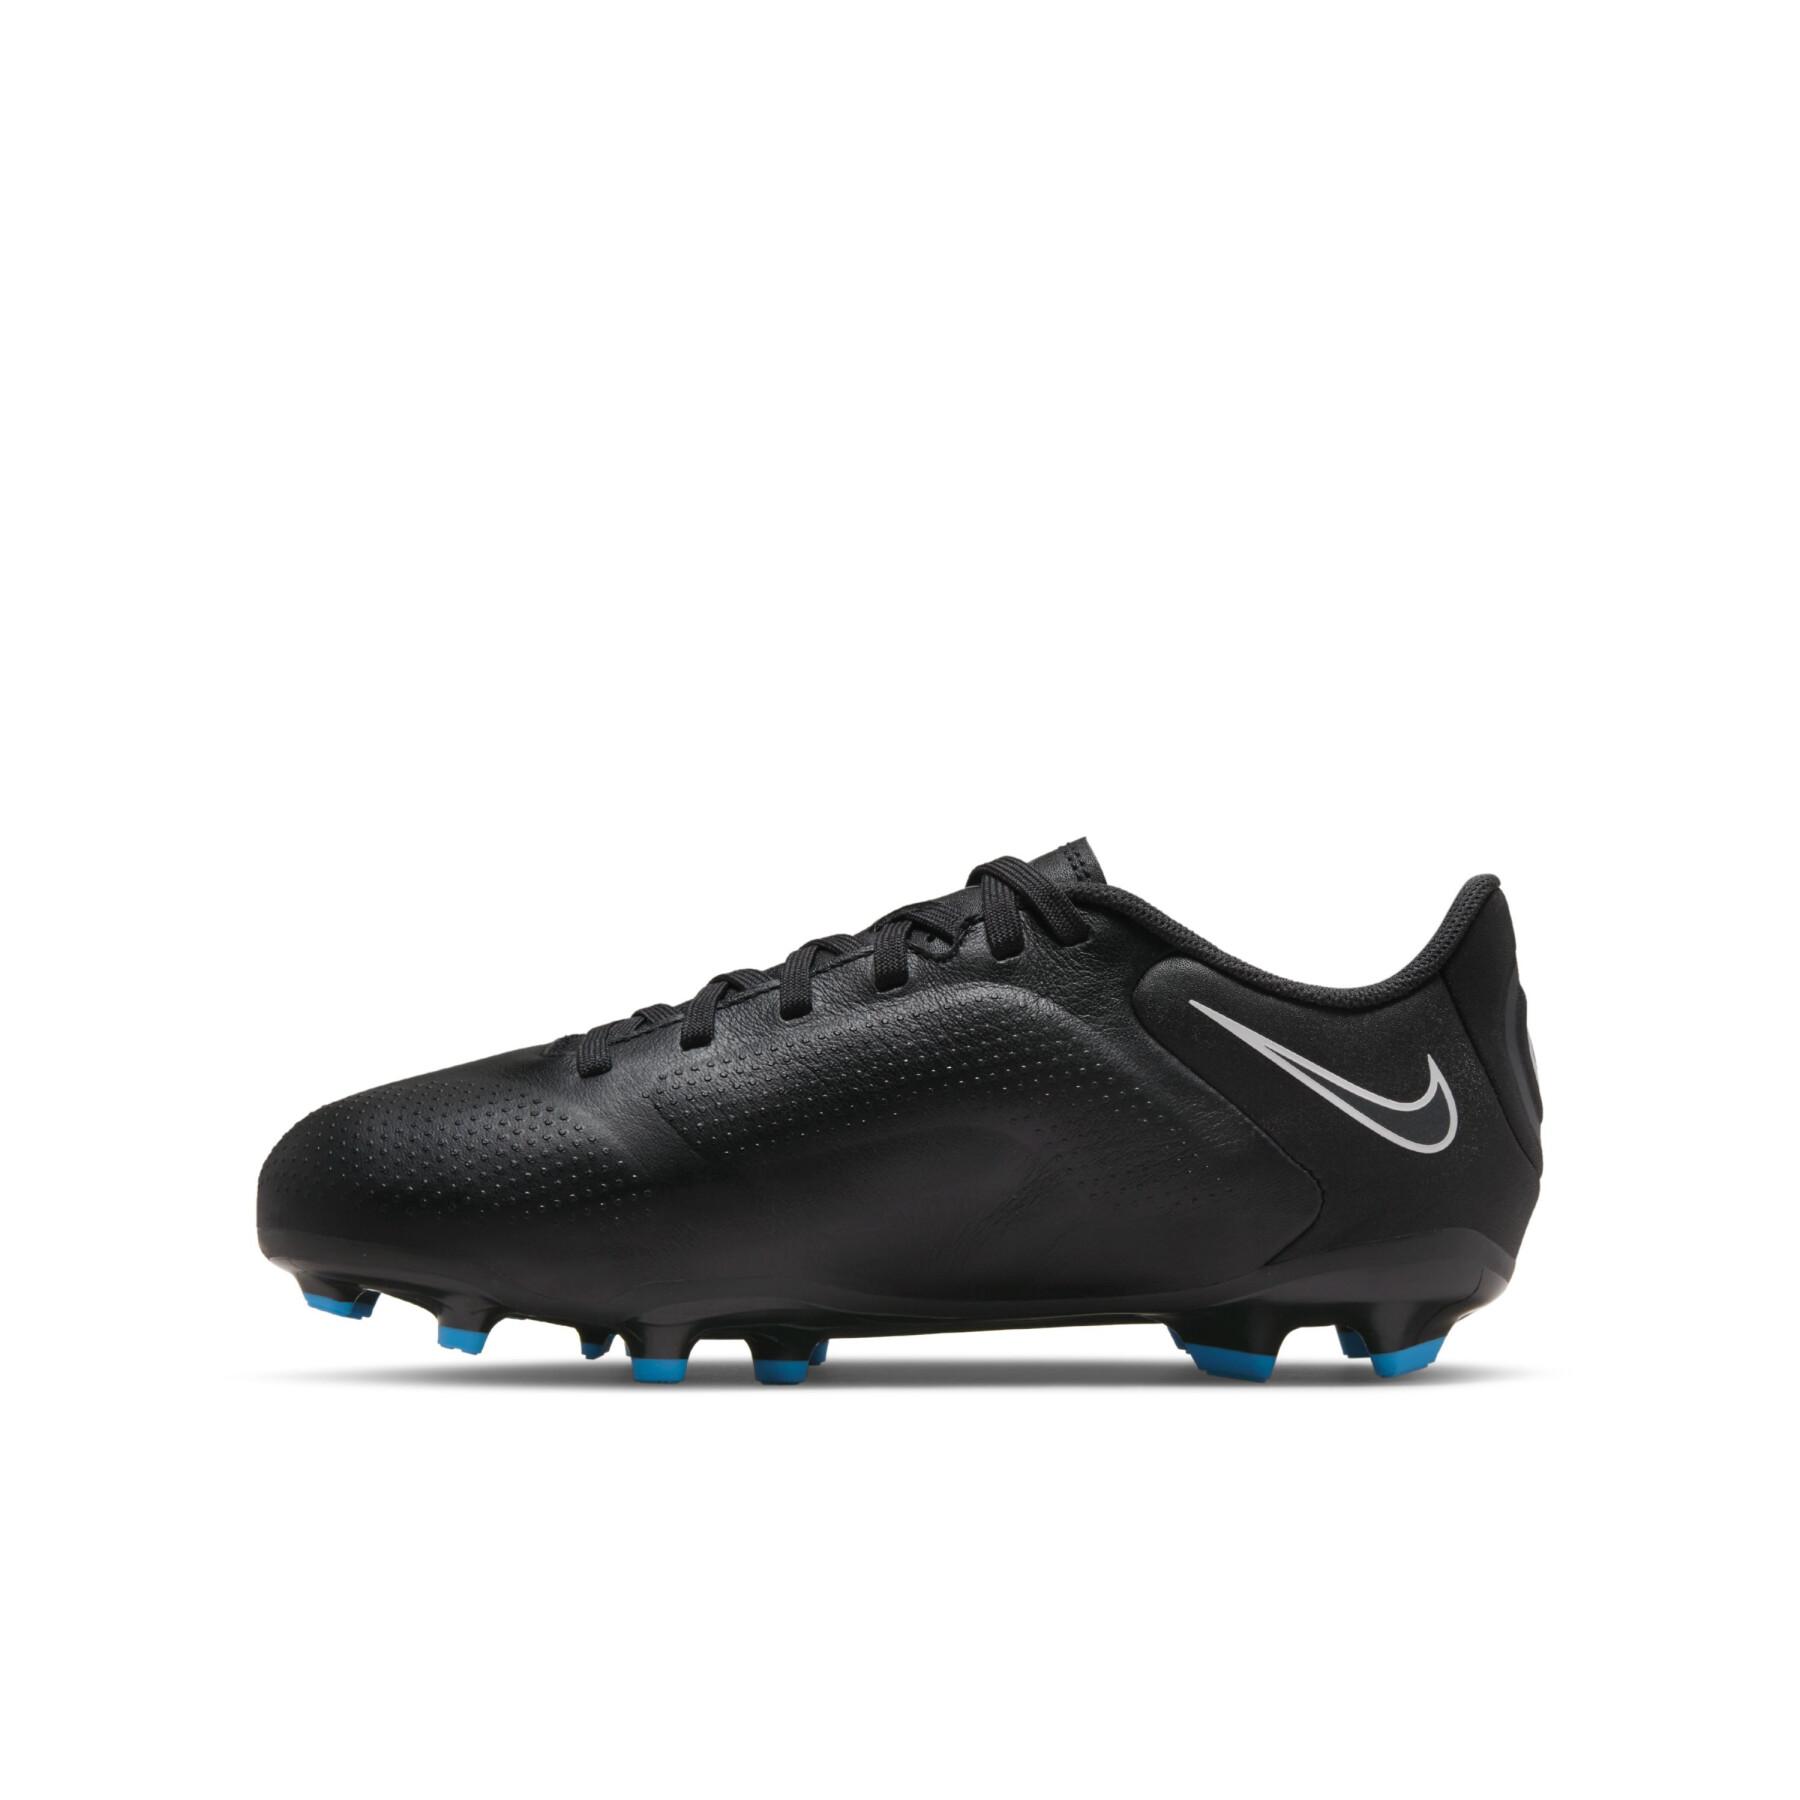 Children's soccer shoes Nike Tiempo Legend 9 Academy MG - Shadow Black Pack